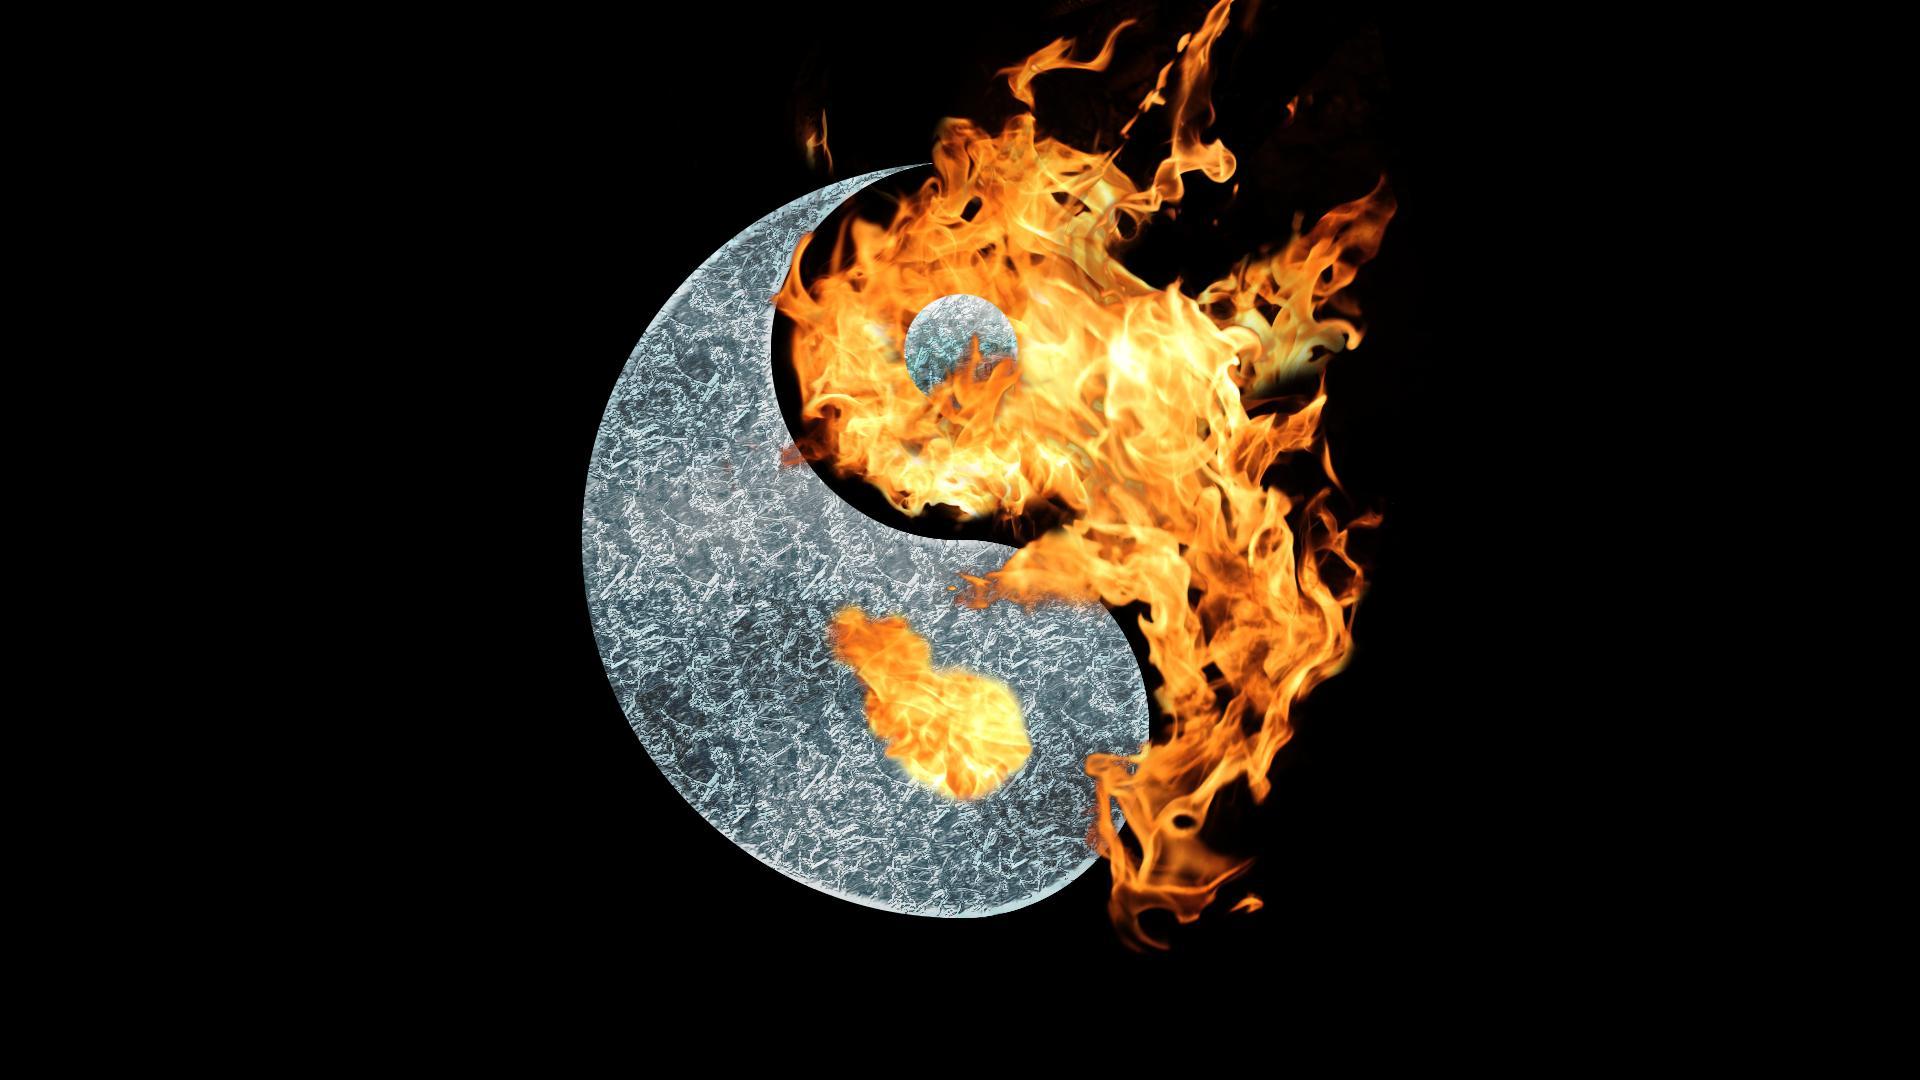 Yin Yang is a philosophical concept expressing the dualism